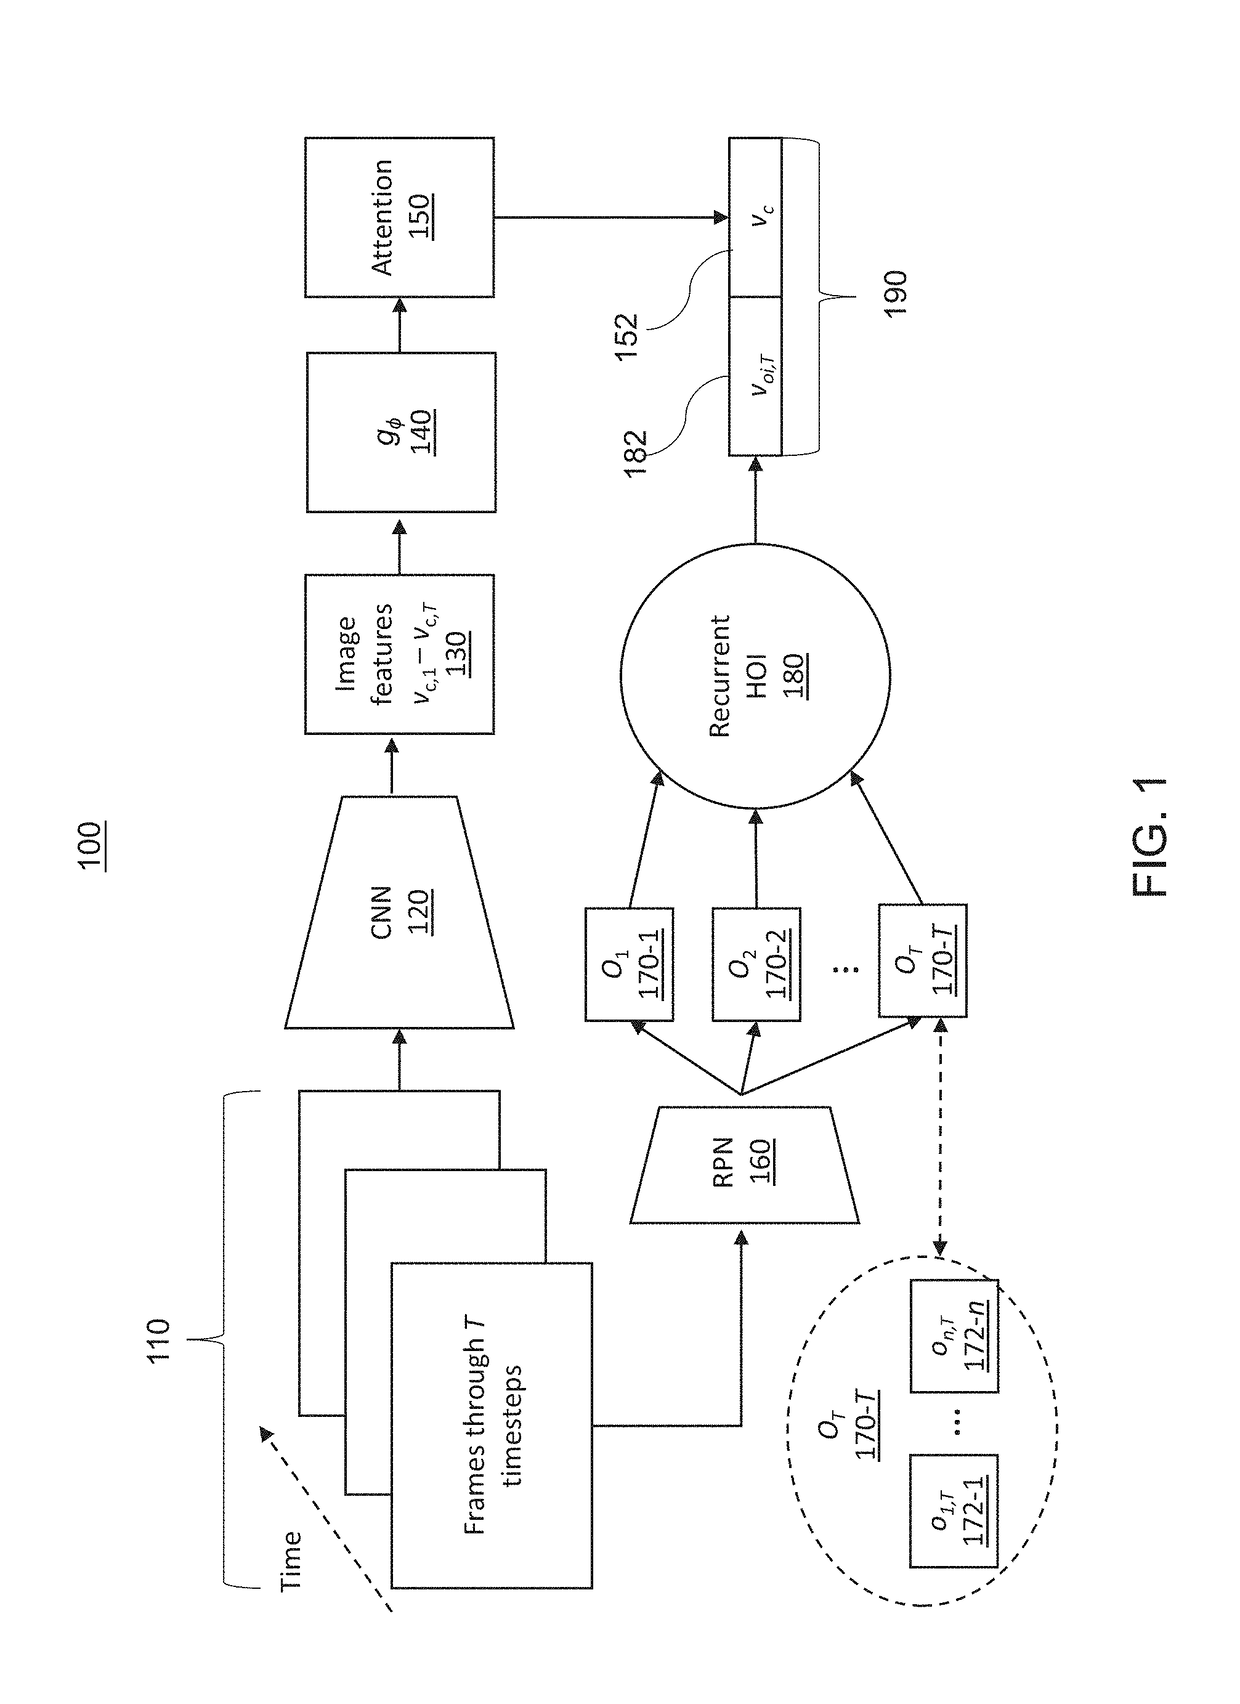 Spatio-temporal interaction network for learning object interactions